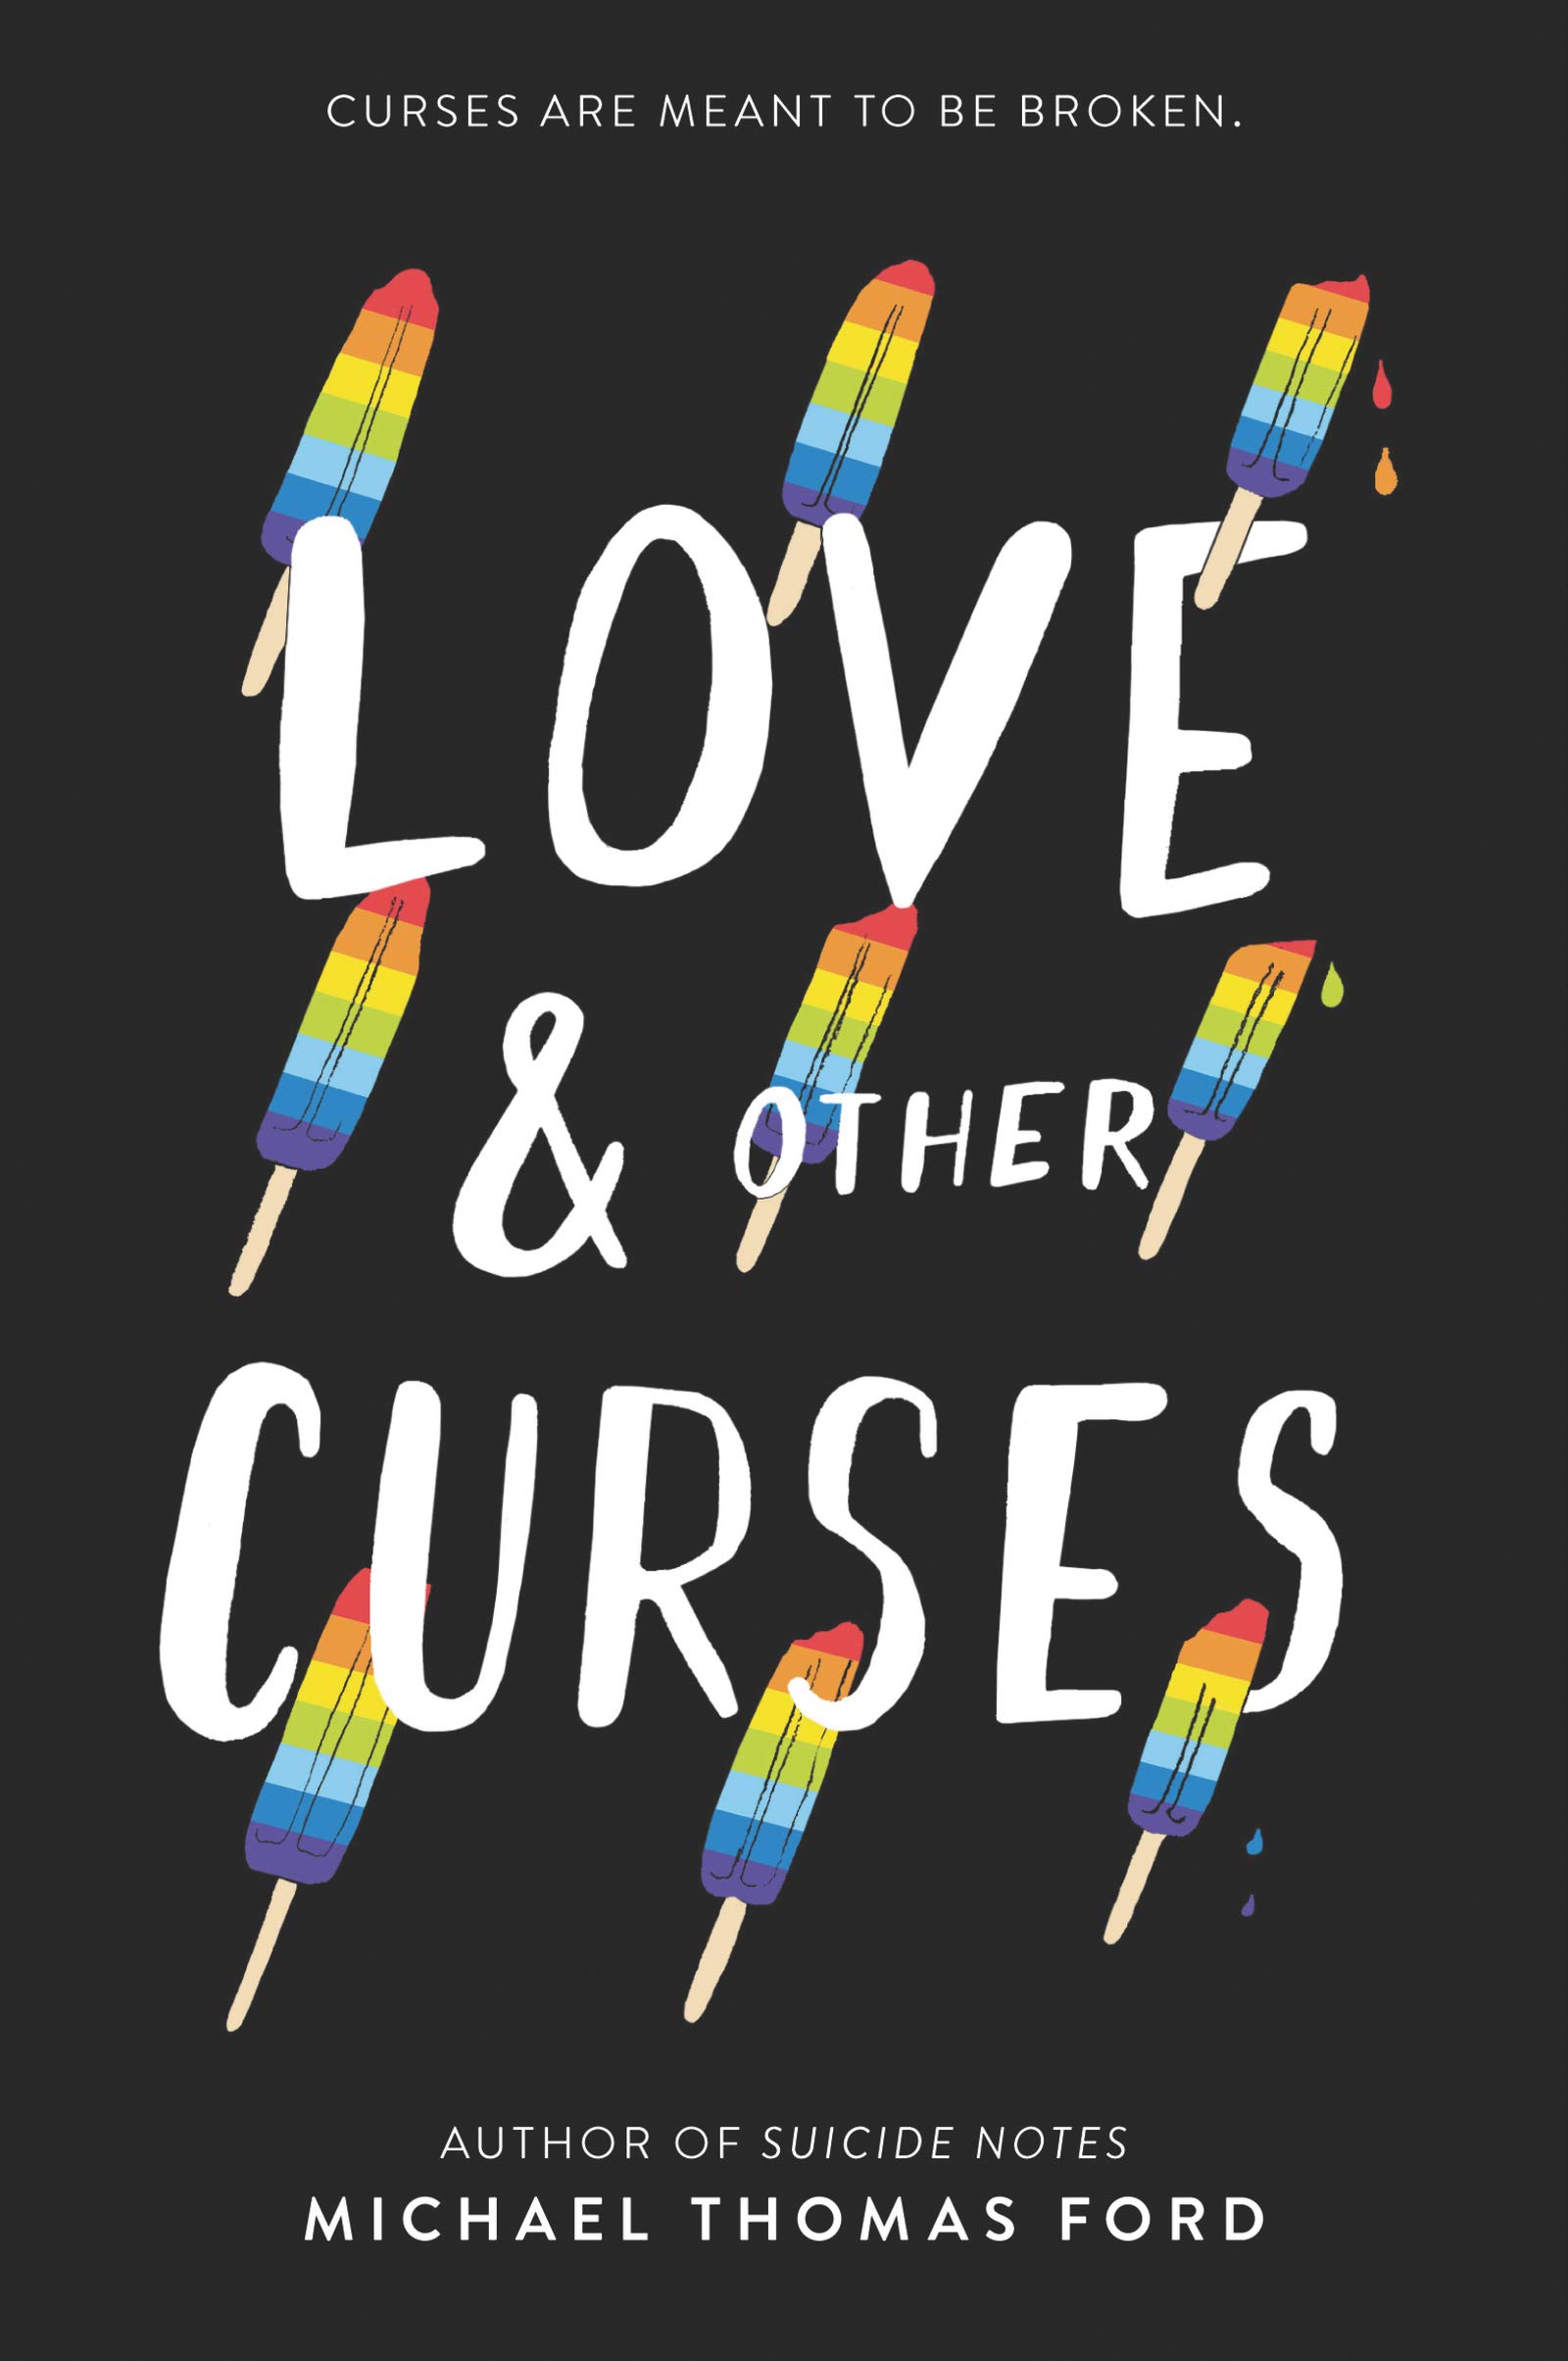 Love & Other Curses by Michael Thomas Ford